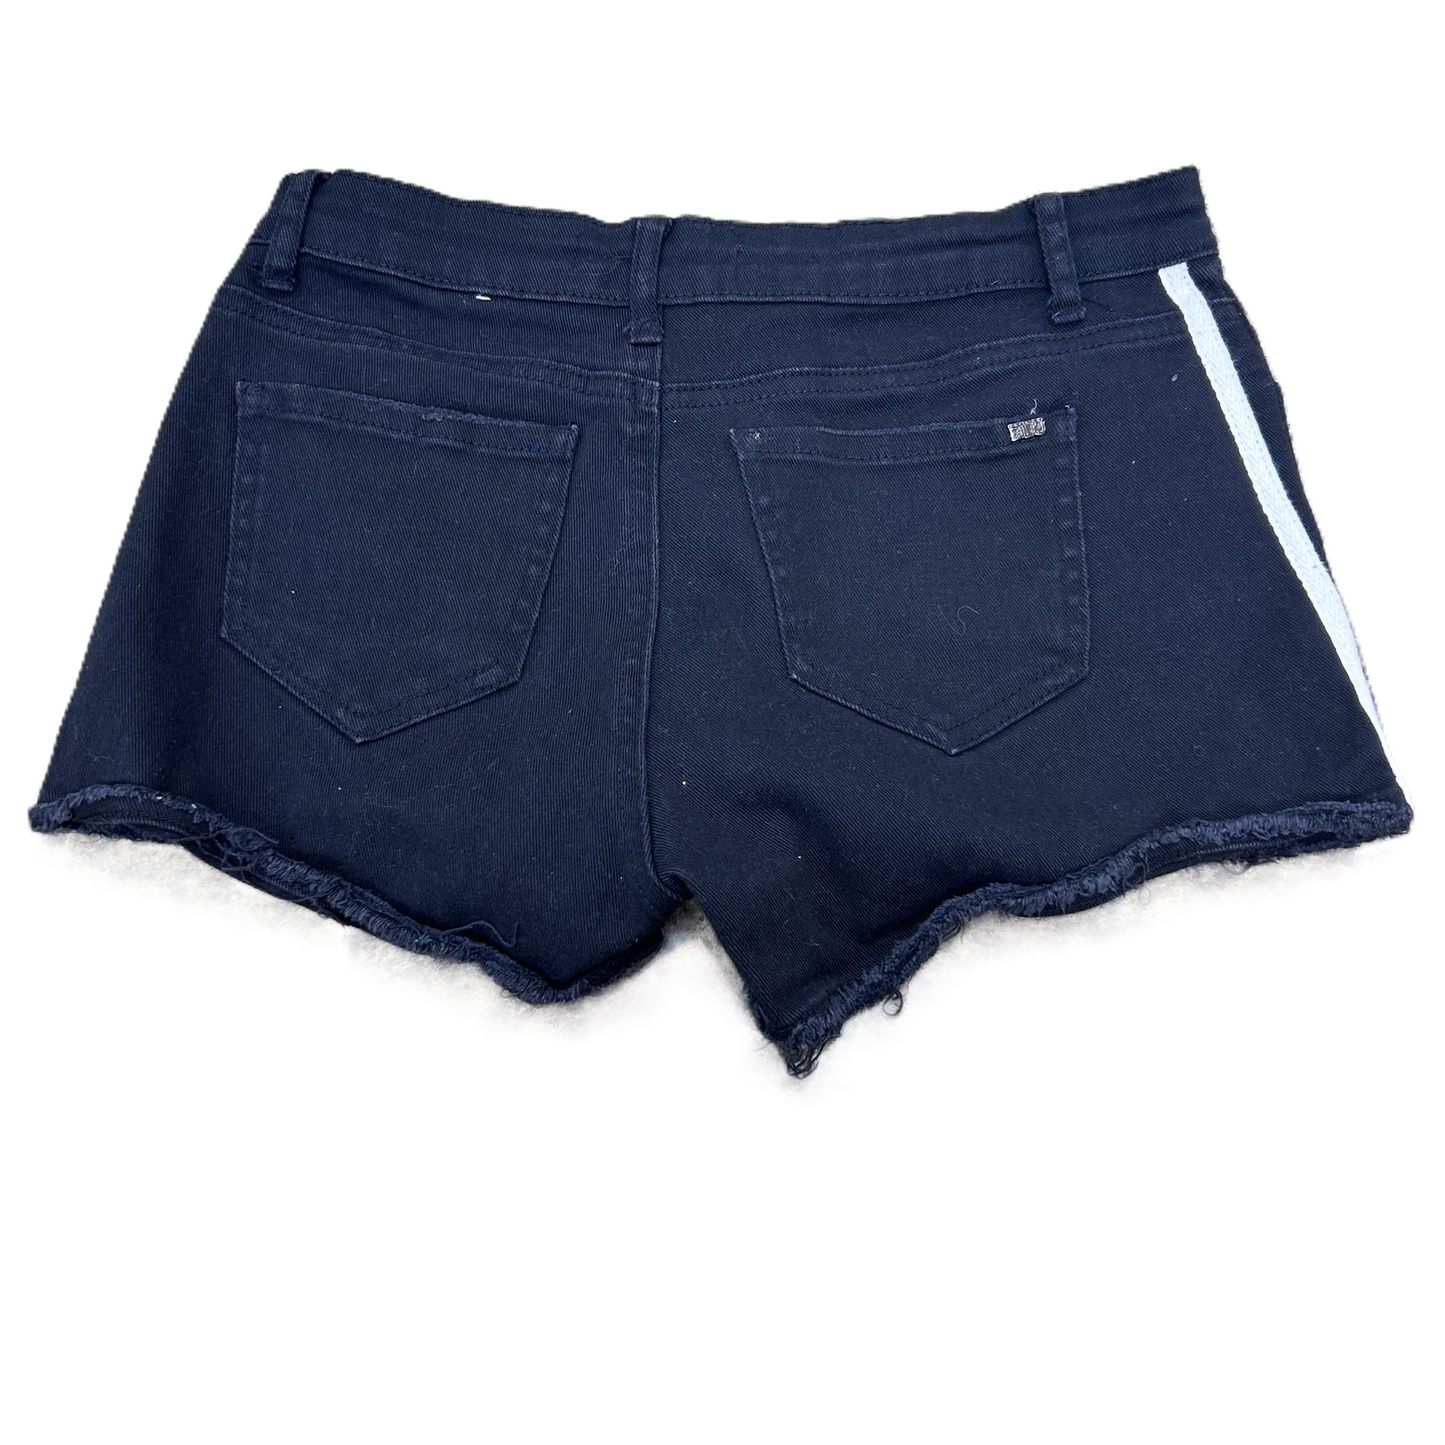 Shorts By Tractr Blu  Size: 2